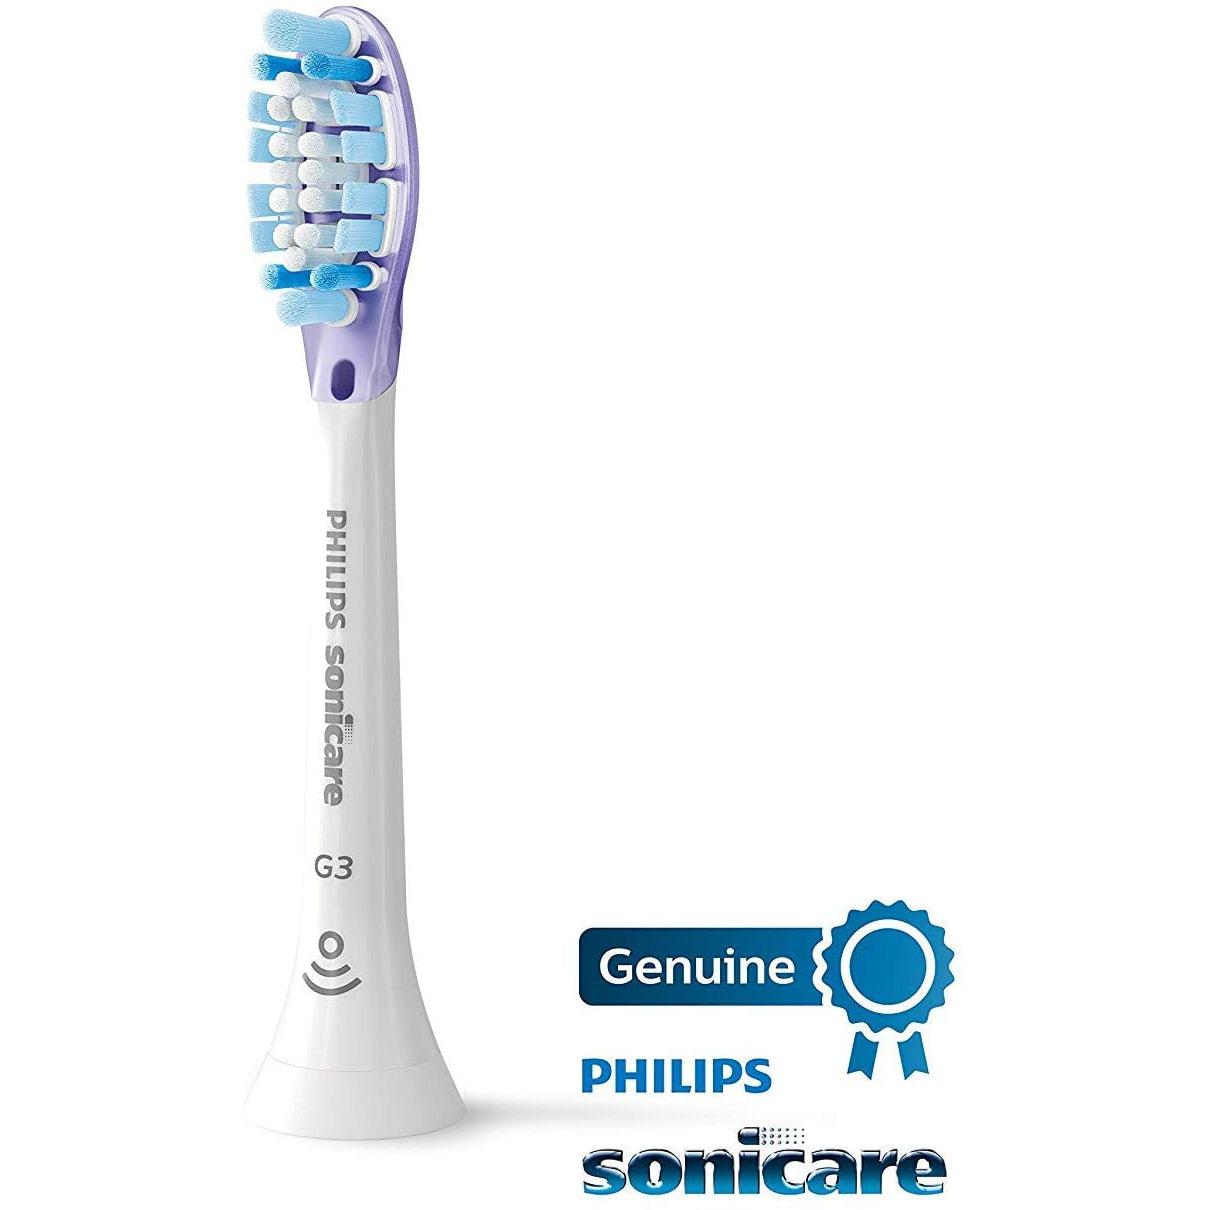 Philips Sonicare HX9052/17 Premium Gum Care White BrushSync Heads (Compatible with All Philips Sonicare Handles), Pack of 2 - Healthxpress.ie